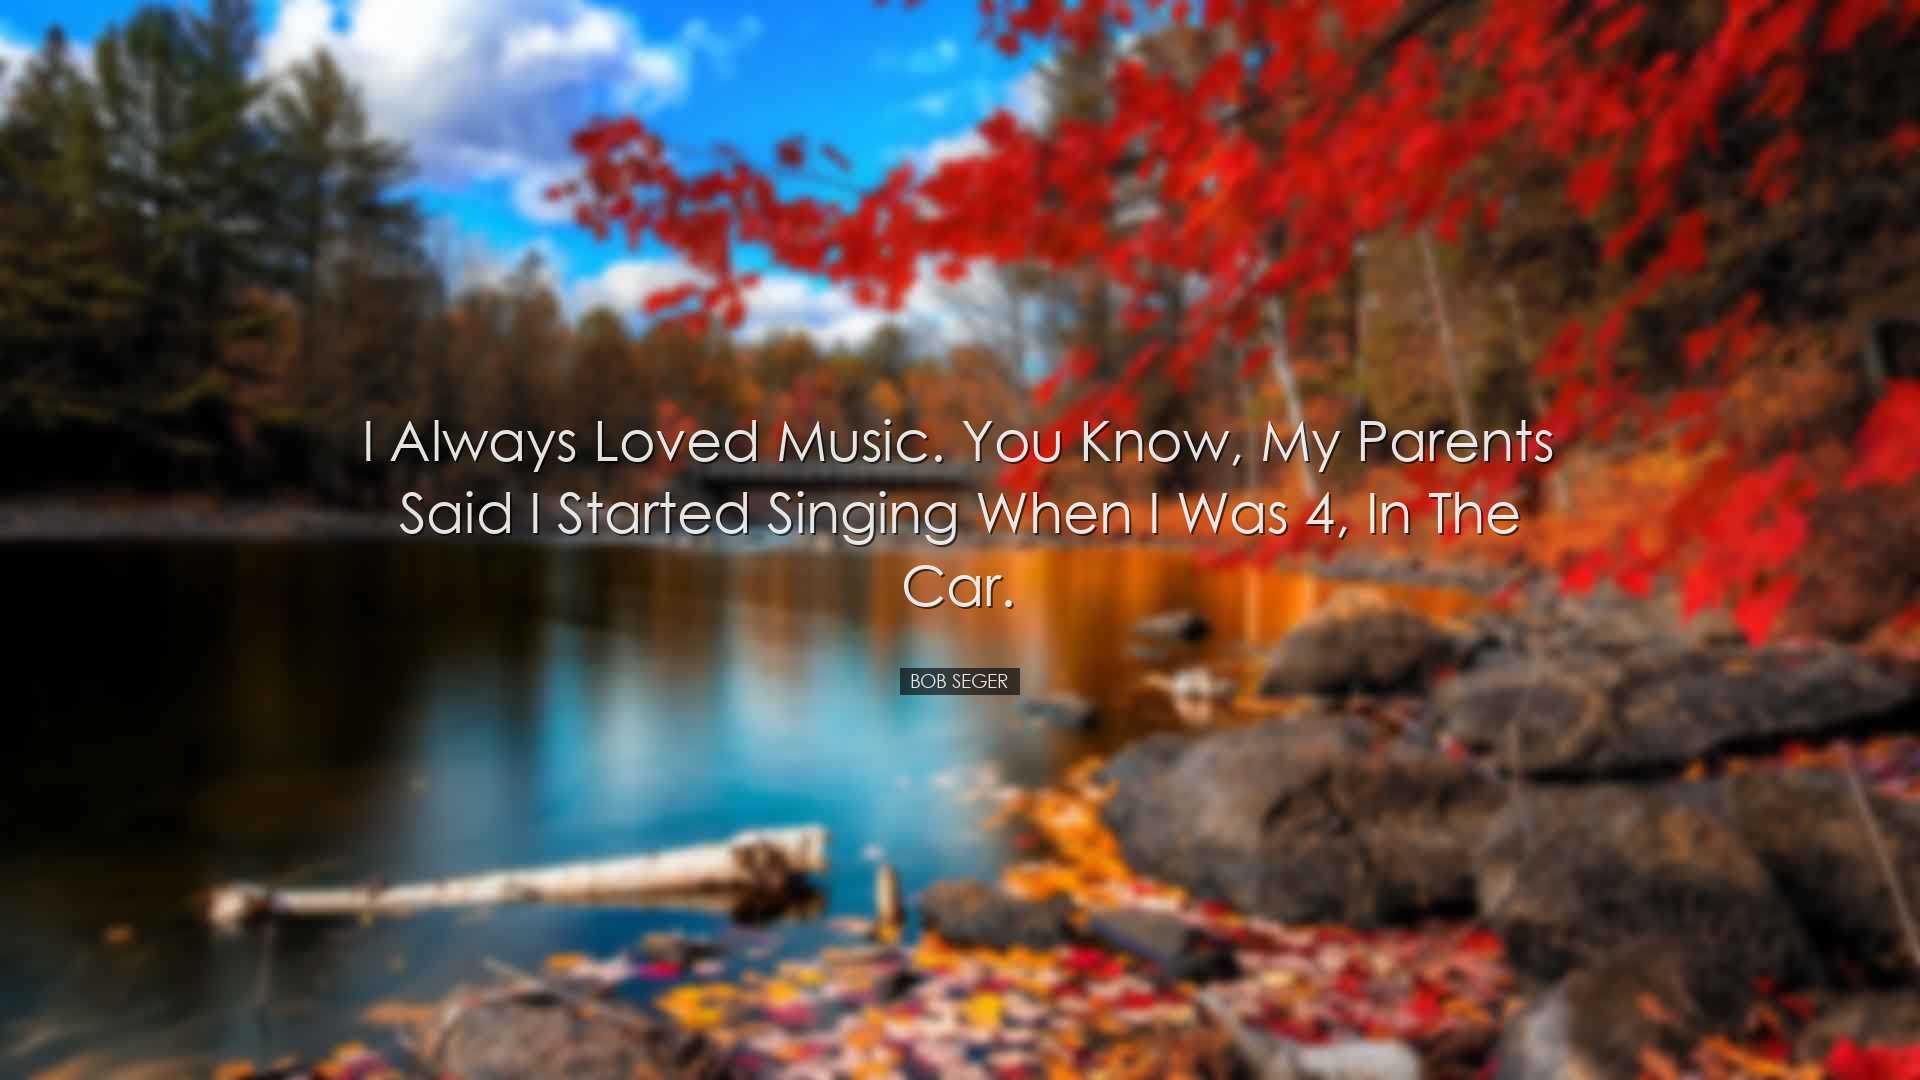 I always loved music. You know, my parents said I started singing